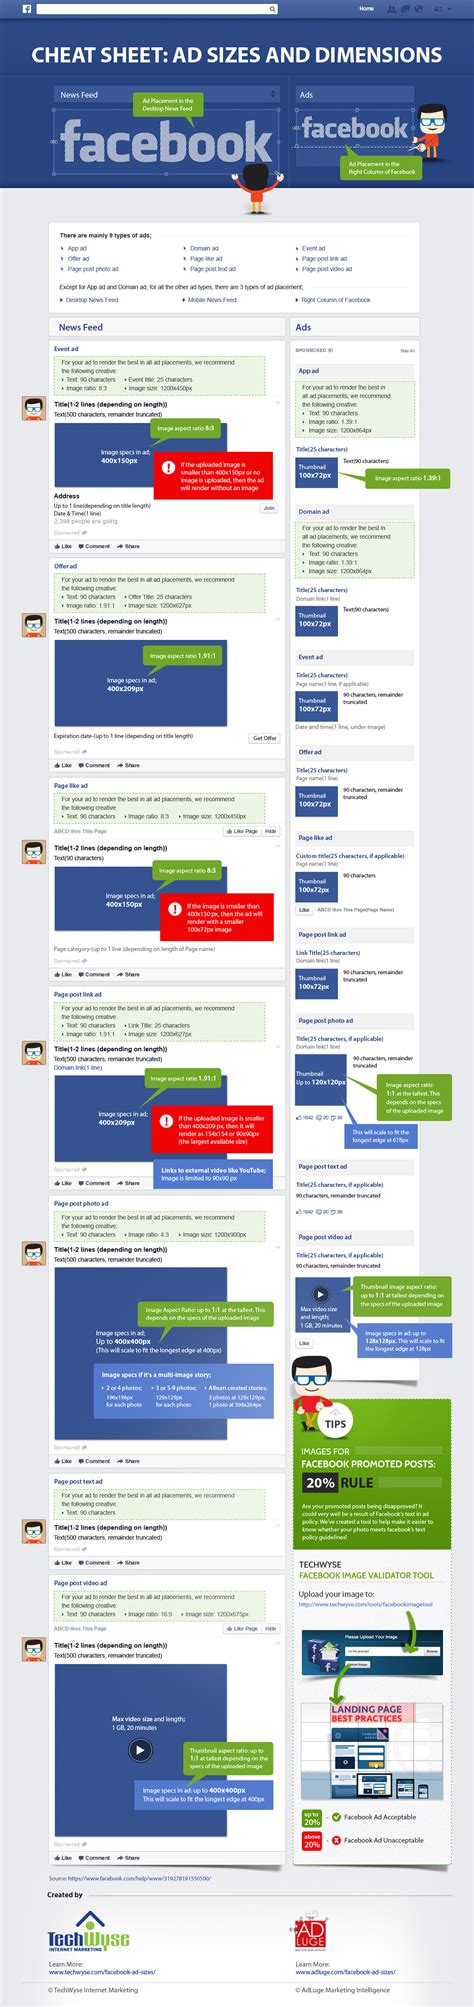 Facebook Ad Specifications And Dimensions Infographic Adluge